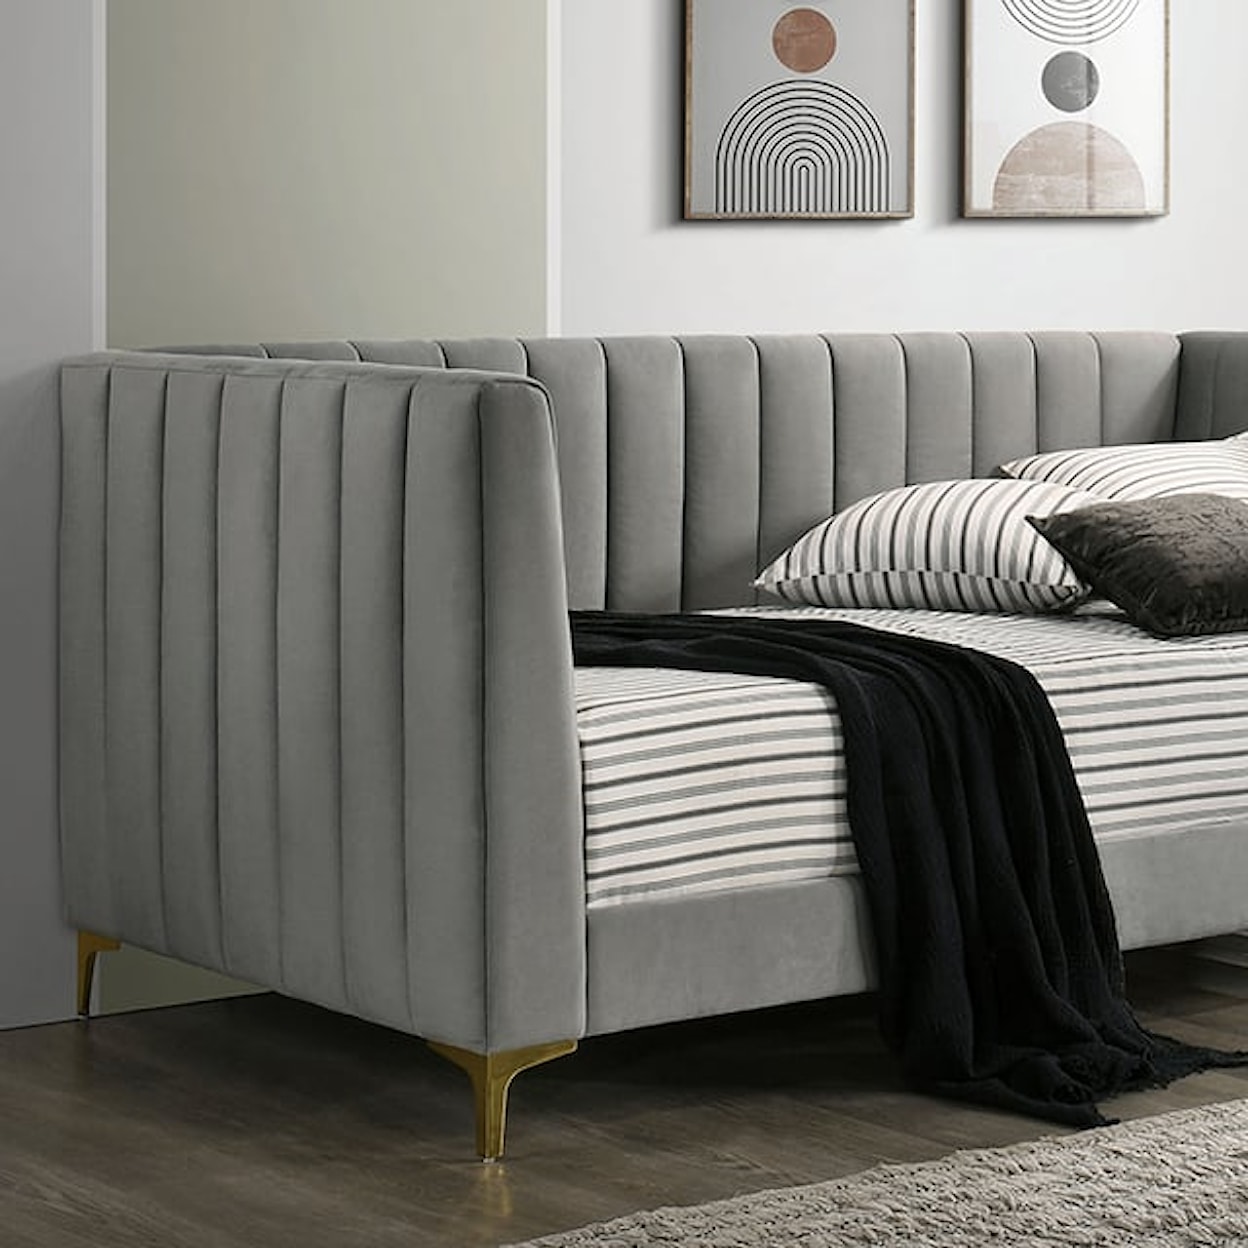 Furniture of America Neoma Twin Daybed